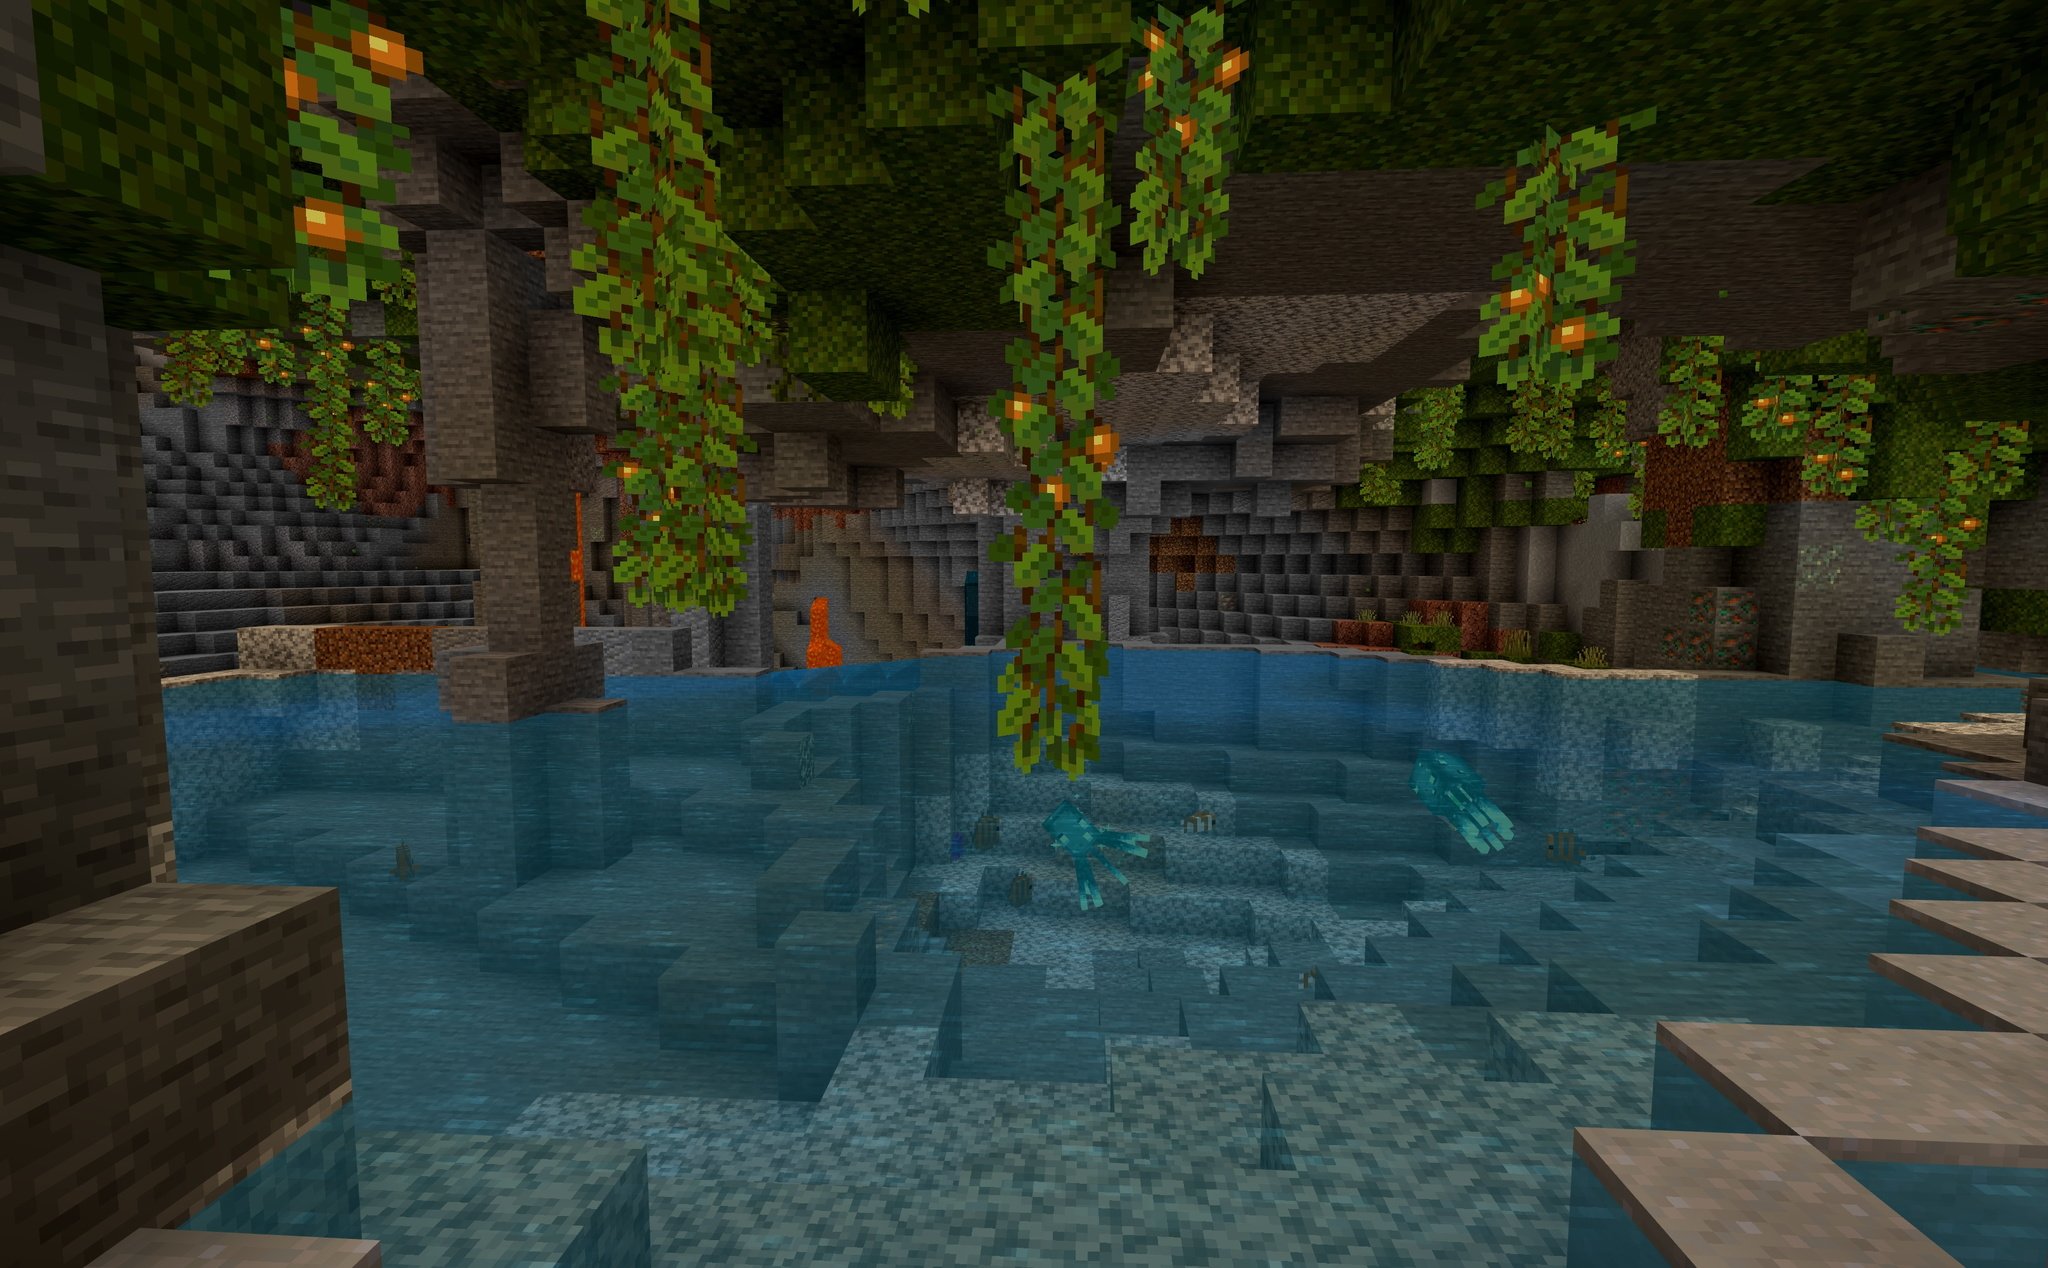 Minecraft Caves And Cliffs Update 1.18.0.21 Beta Image